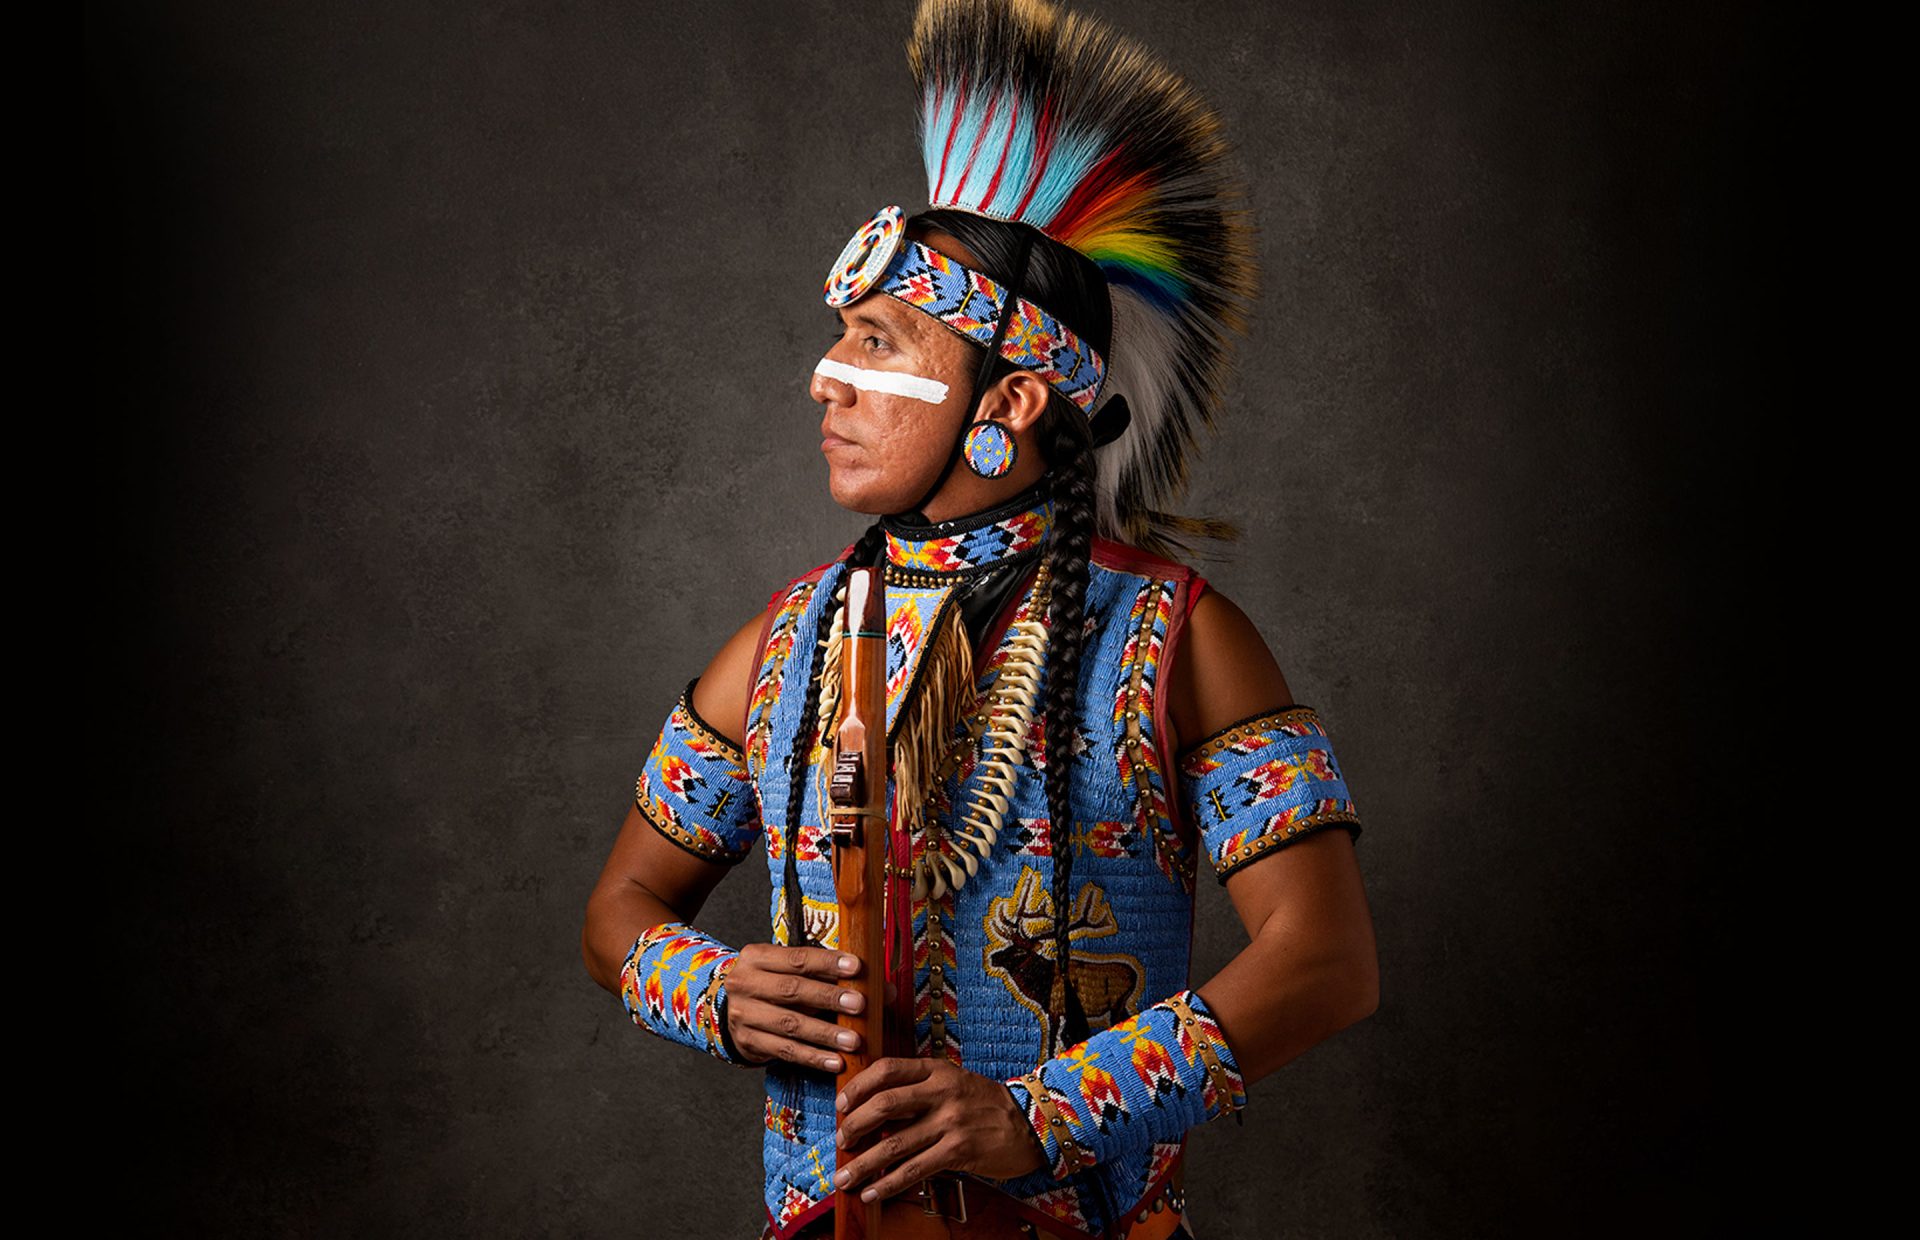 A Native American man in a headdress and holding an instrument posing for a photograph.